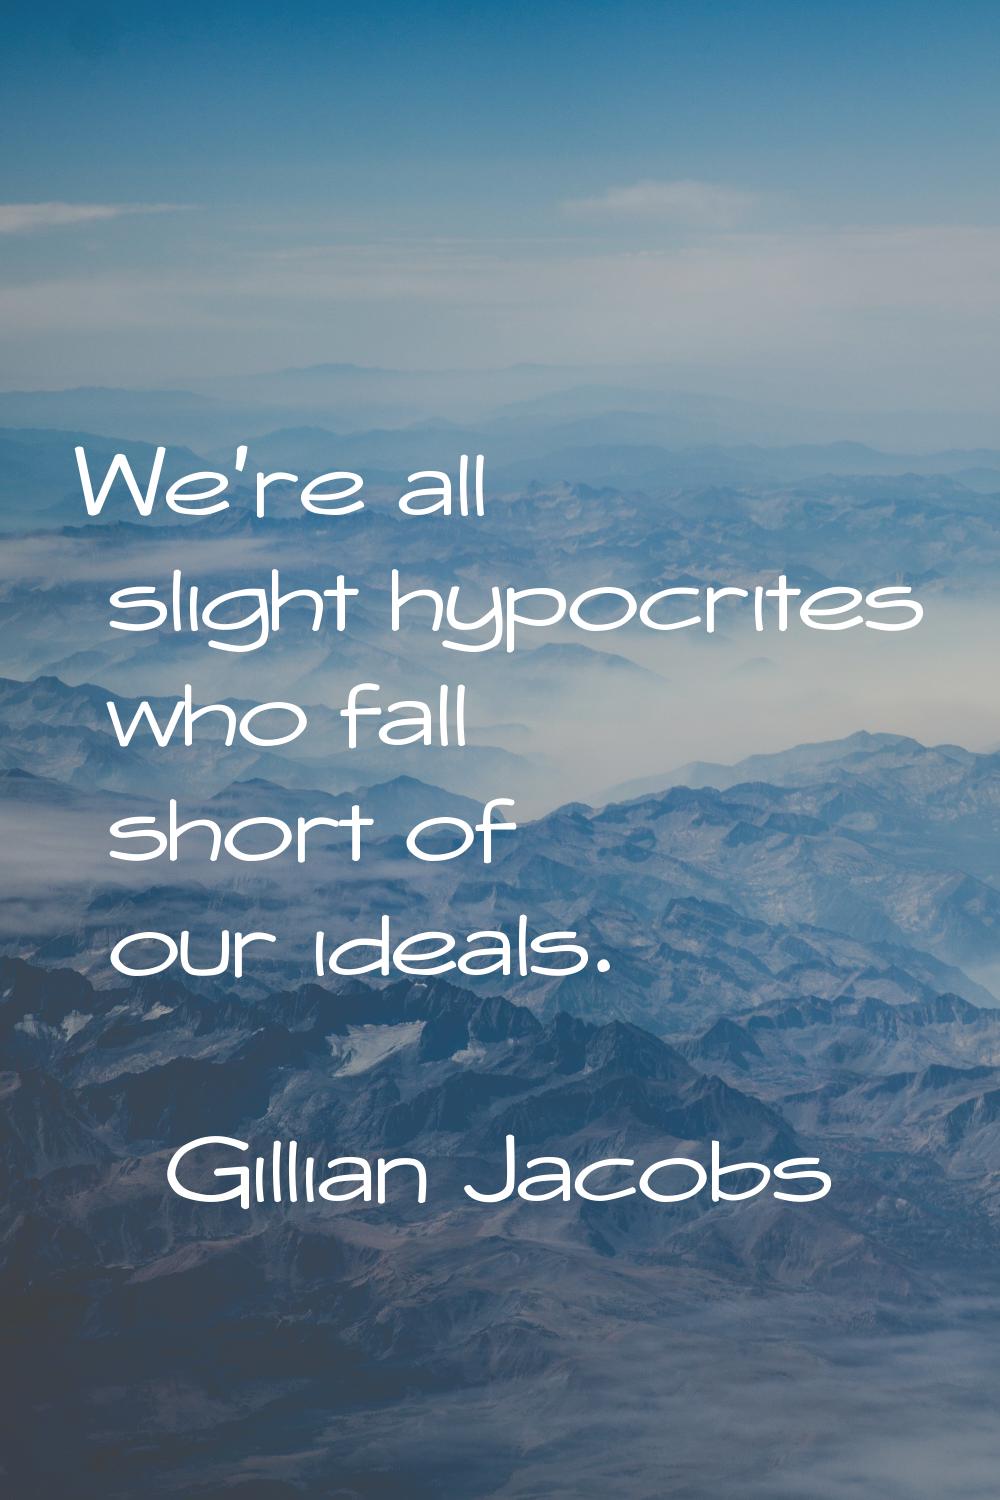 We're all slight hypocrites who fall short of our ideals.